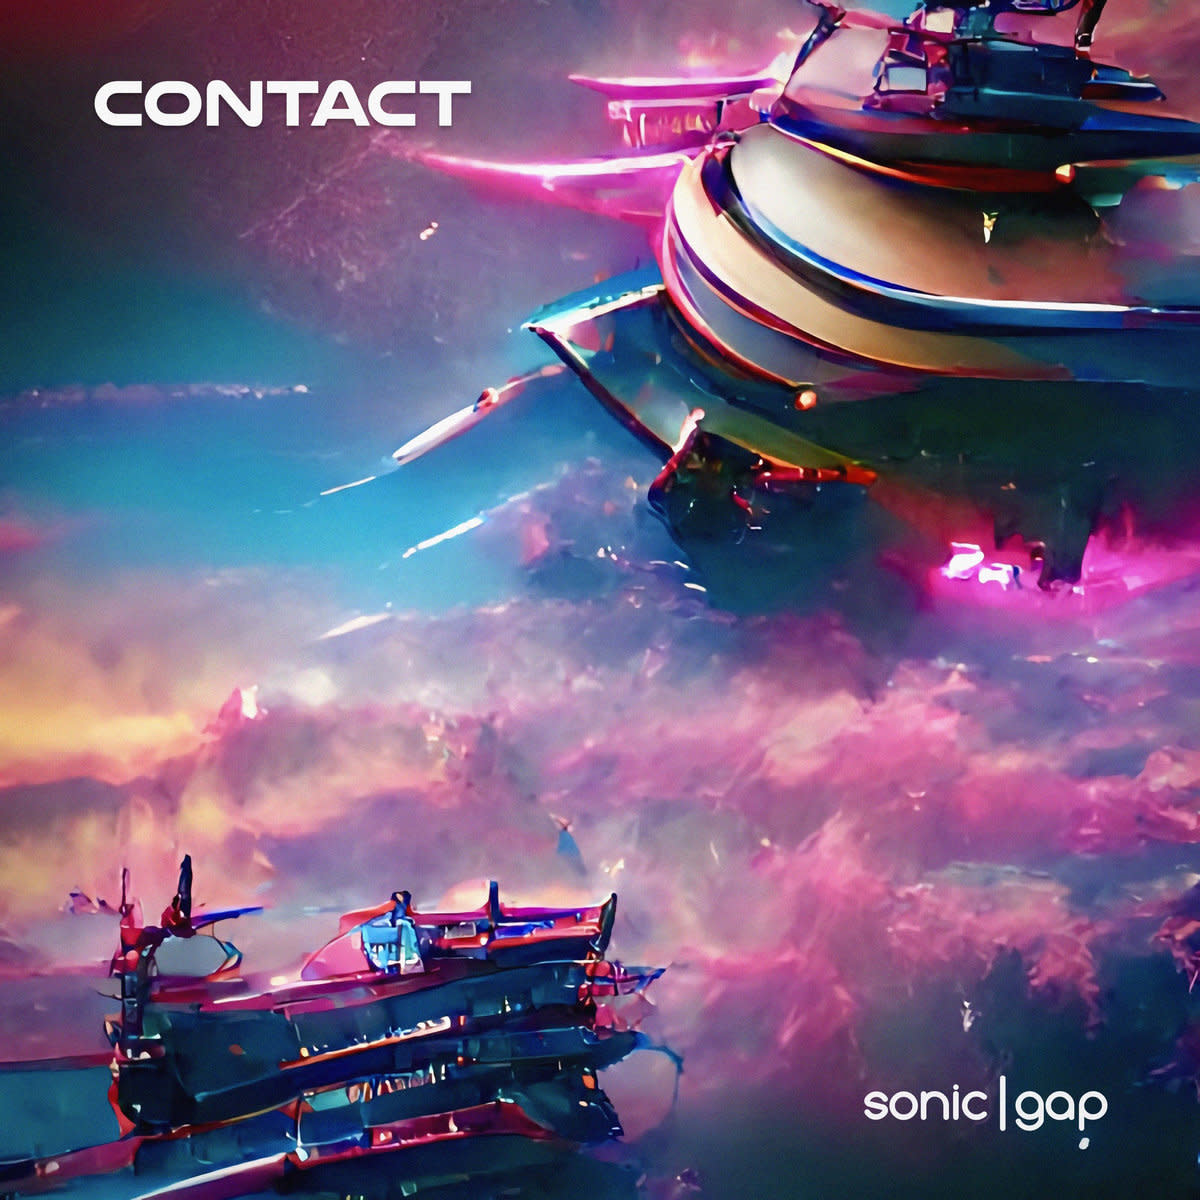 synth-ep-review-contact-by-sonic-gap